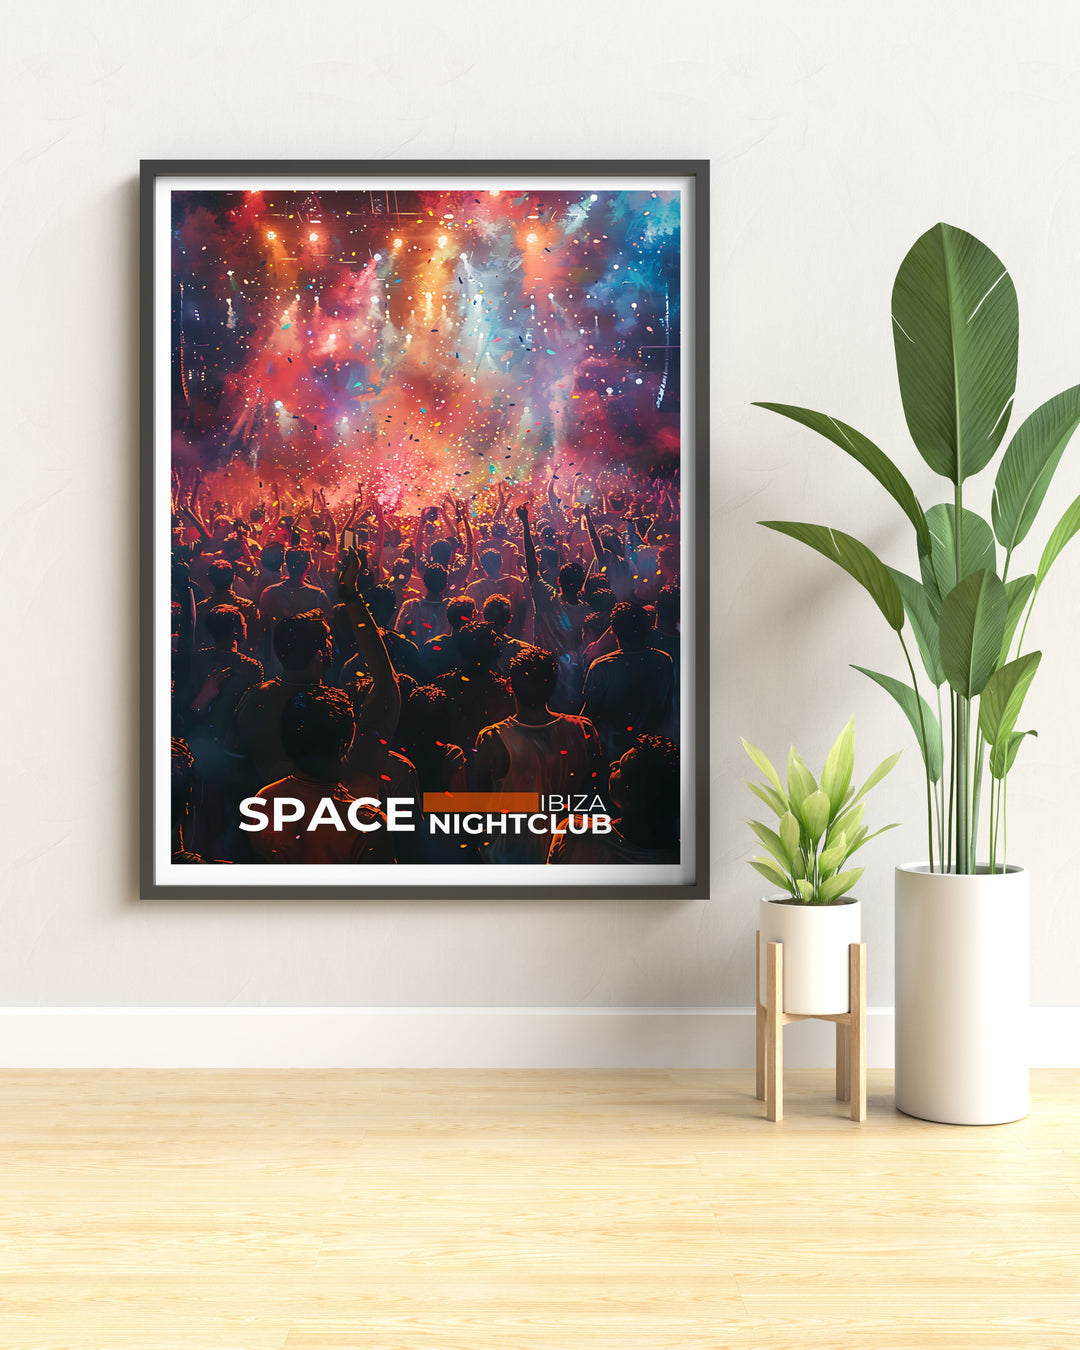 Customizable prints of Space Nightclub, perfect for personalizing your space with scenes of the iconic Ibiza venue.